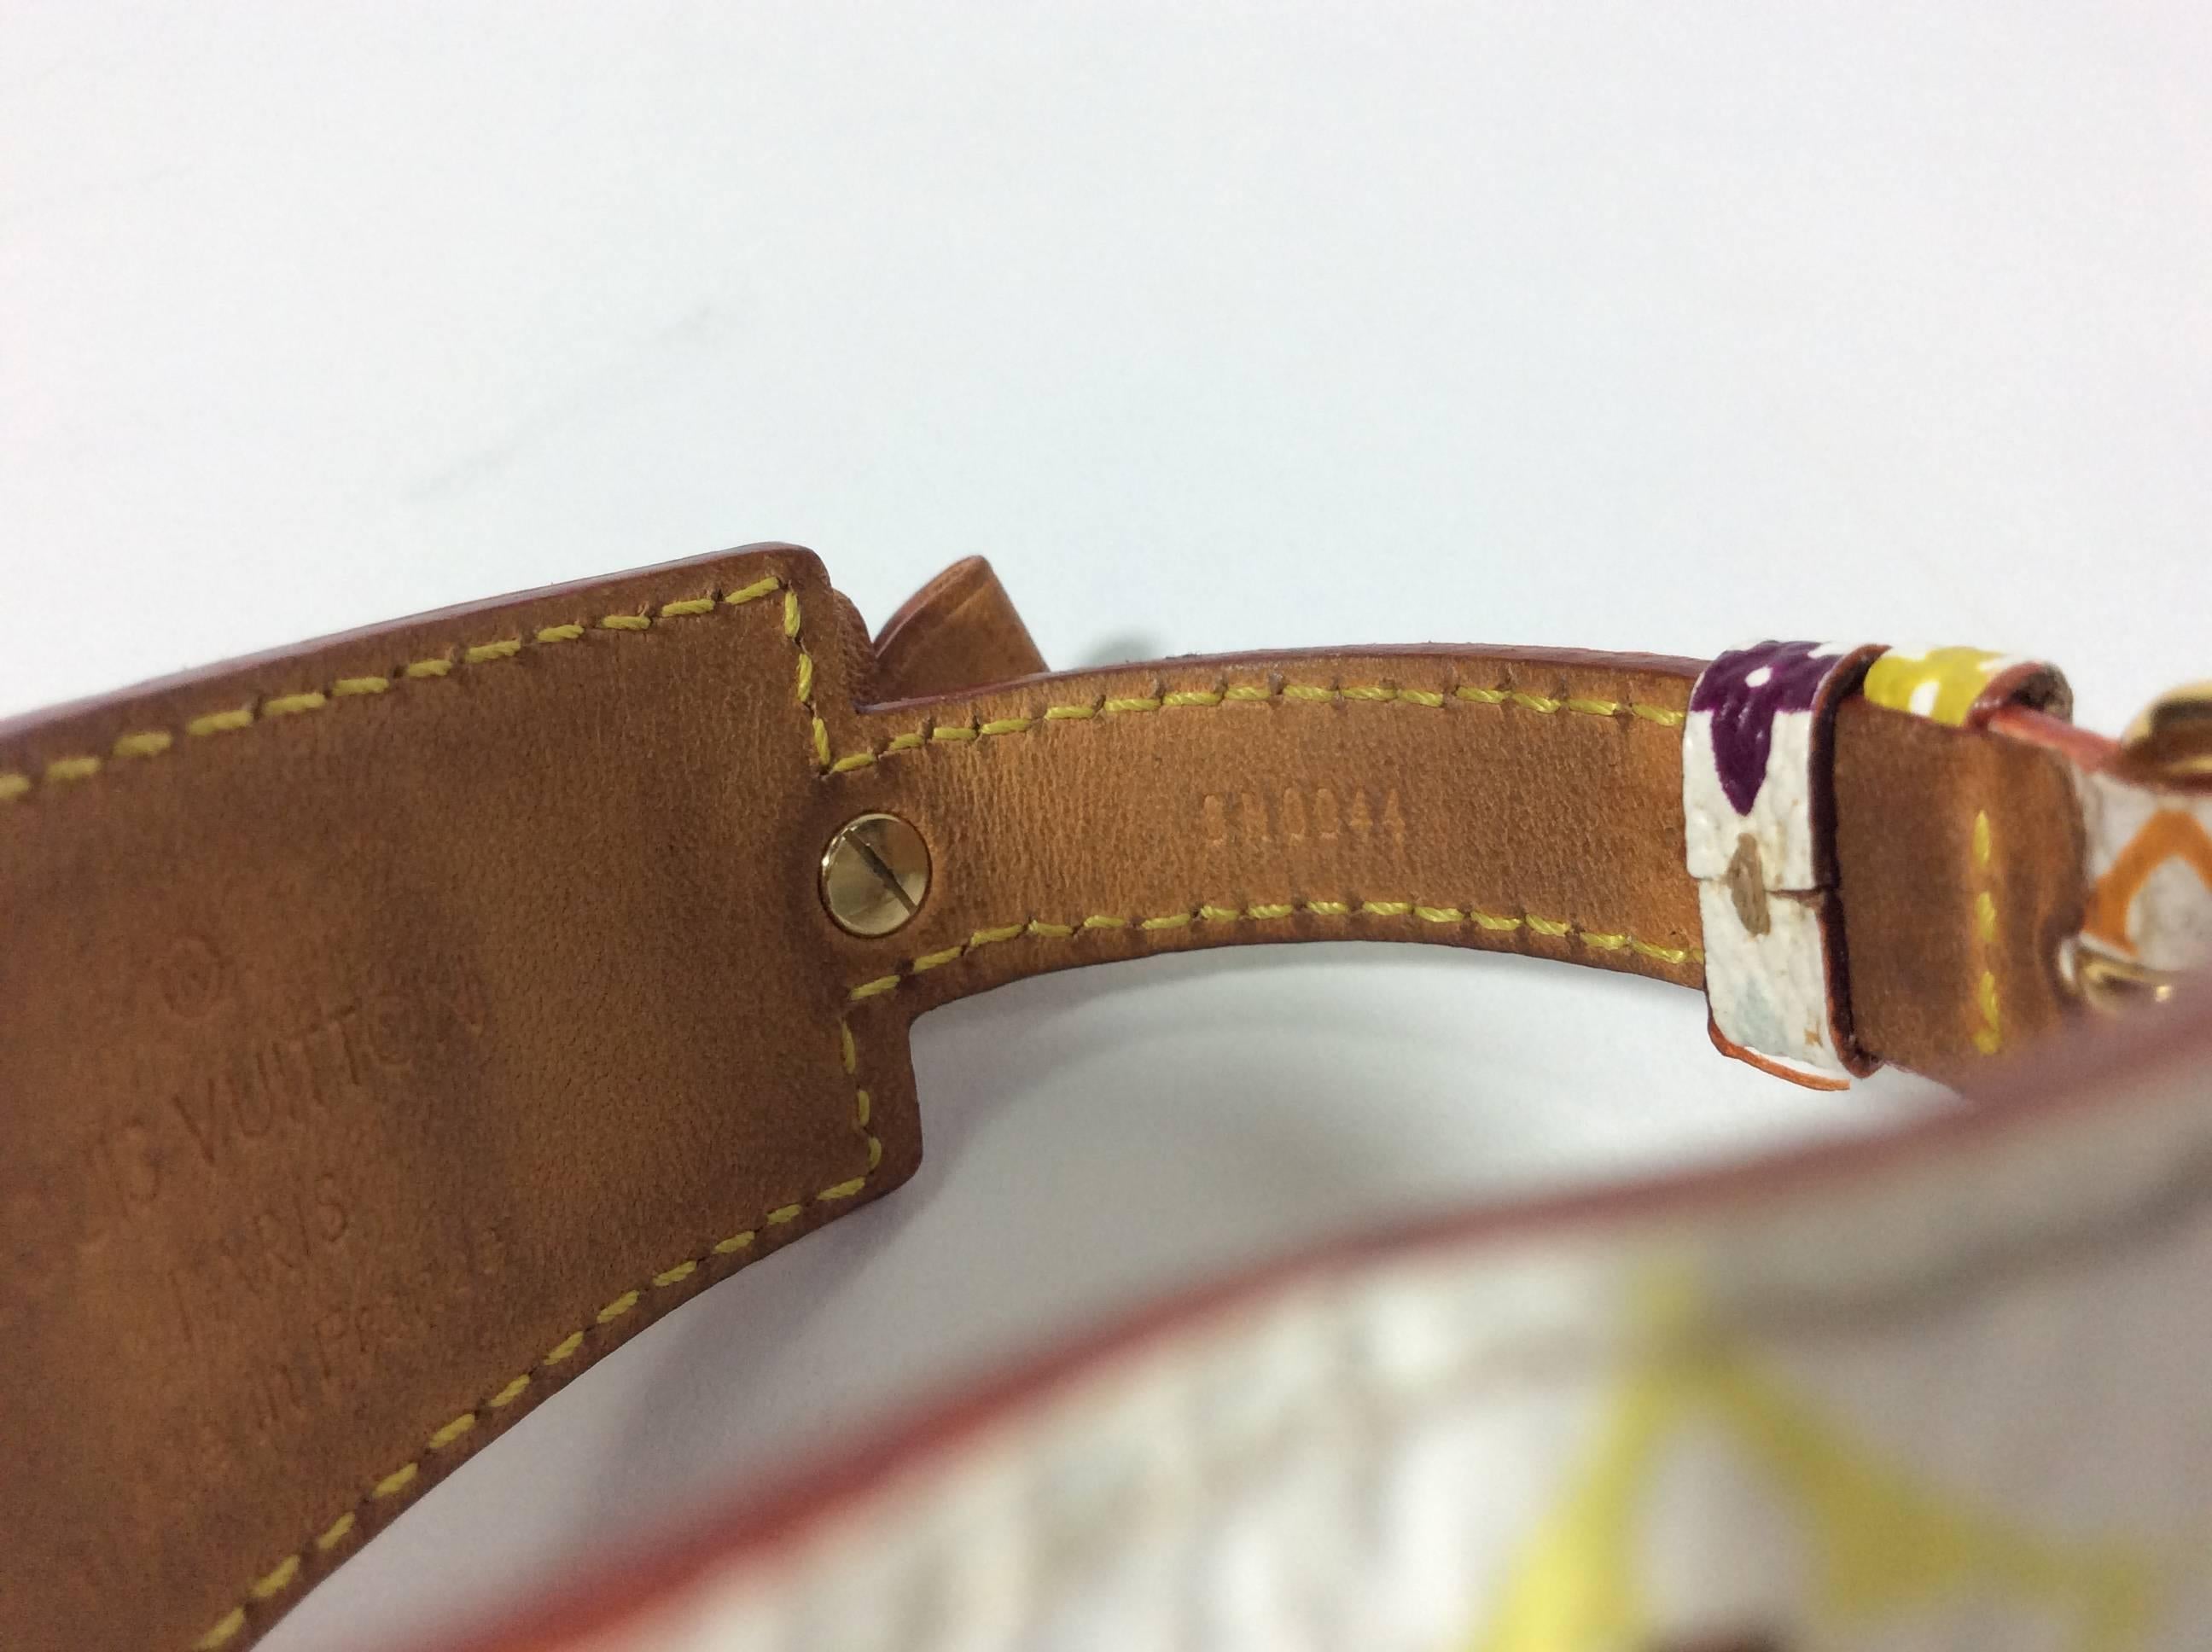 White LV Print Leather Bracelet with Bow
6-7 inch adjustable length
Buckle closure
Brown leather bow detail
Snap closure with clear flap (space to insert nameplate or paper)
